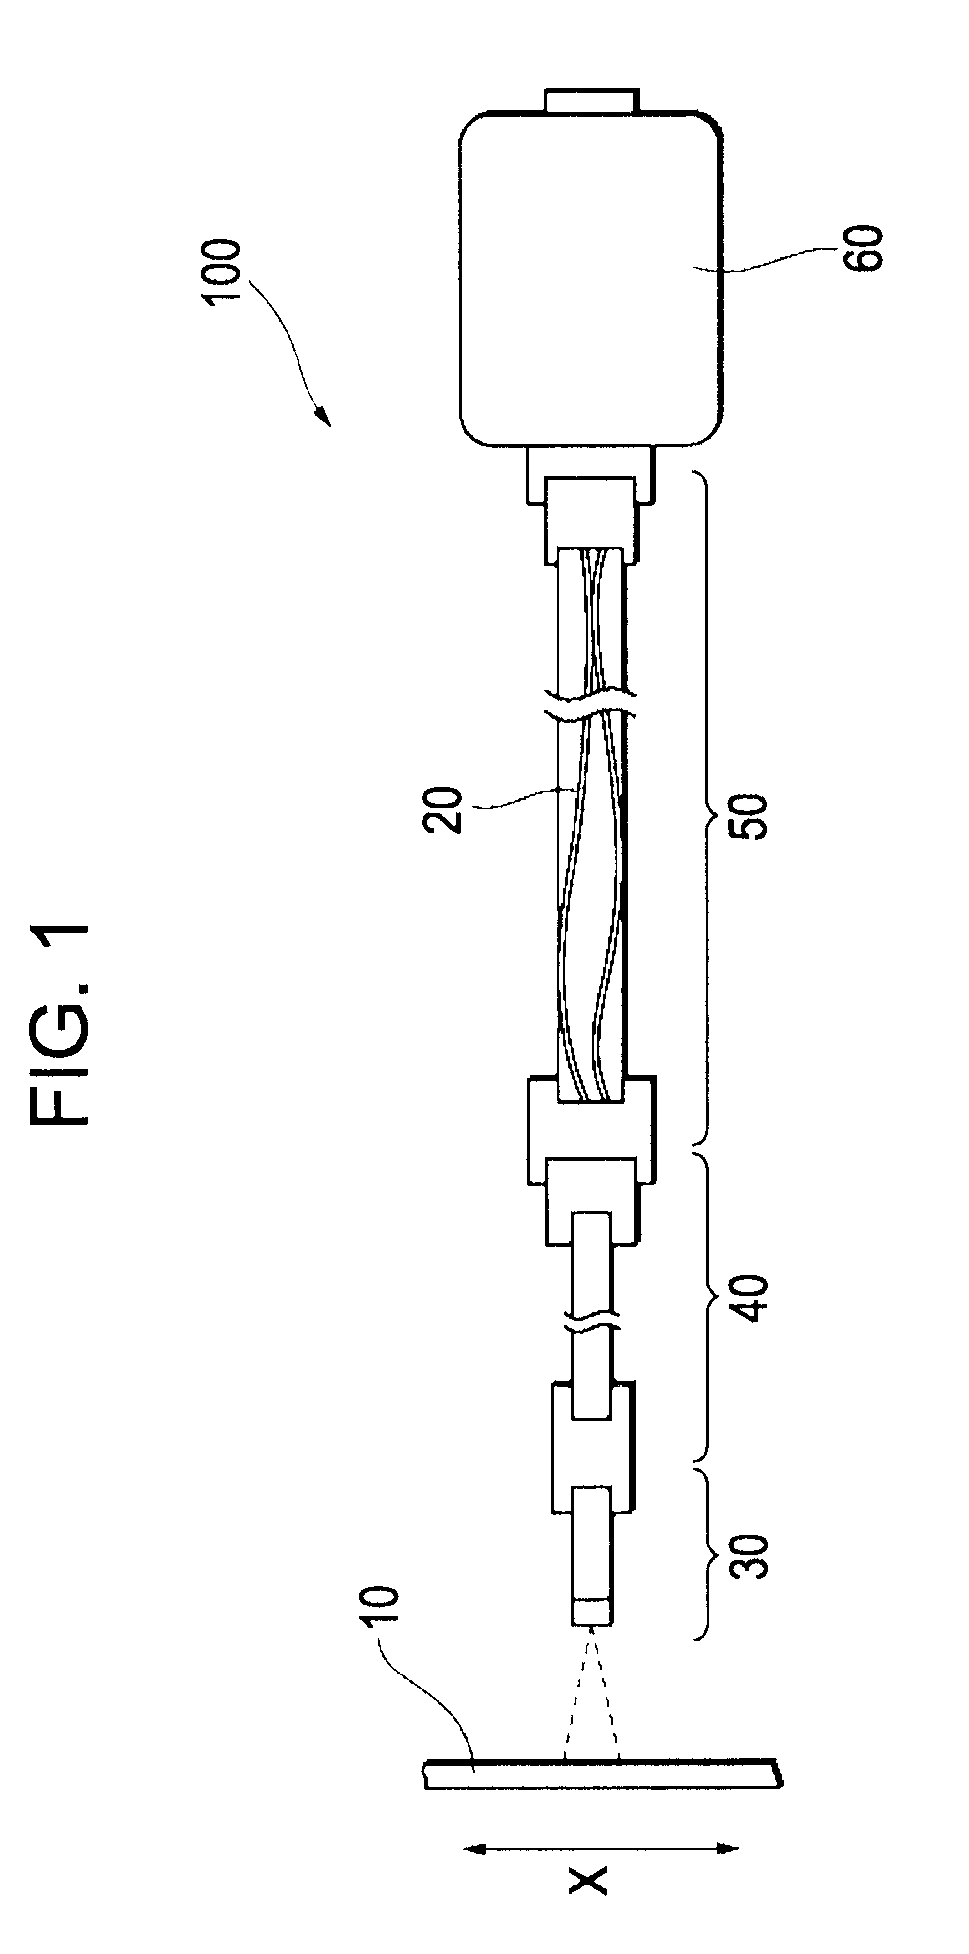 Photoelectric encoder including detection head and a plurality of fibers within a first and second cable